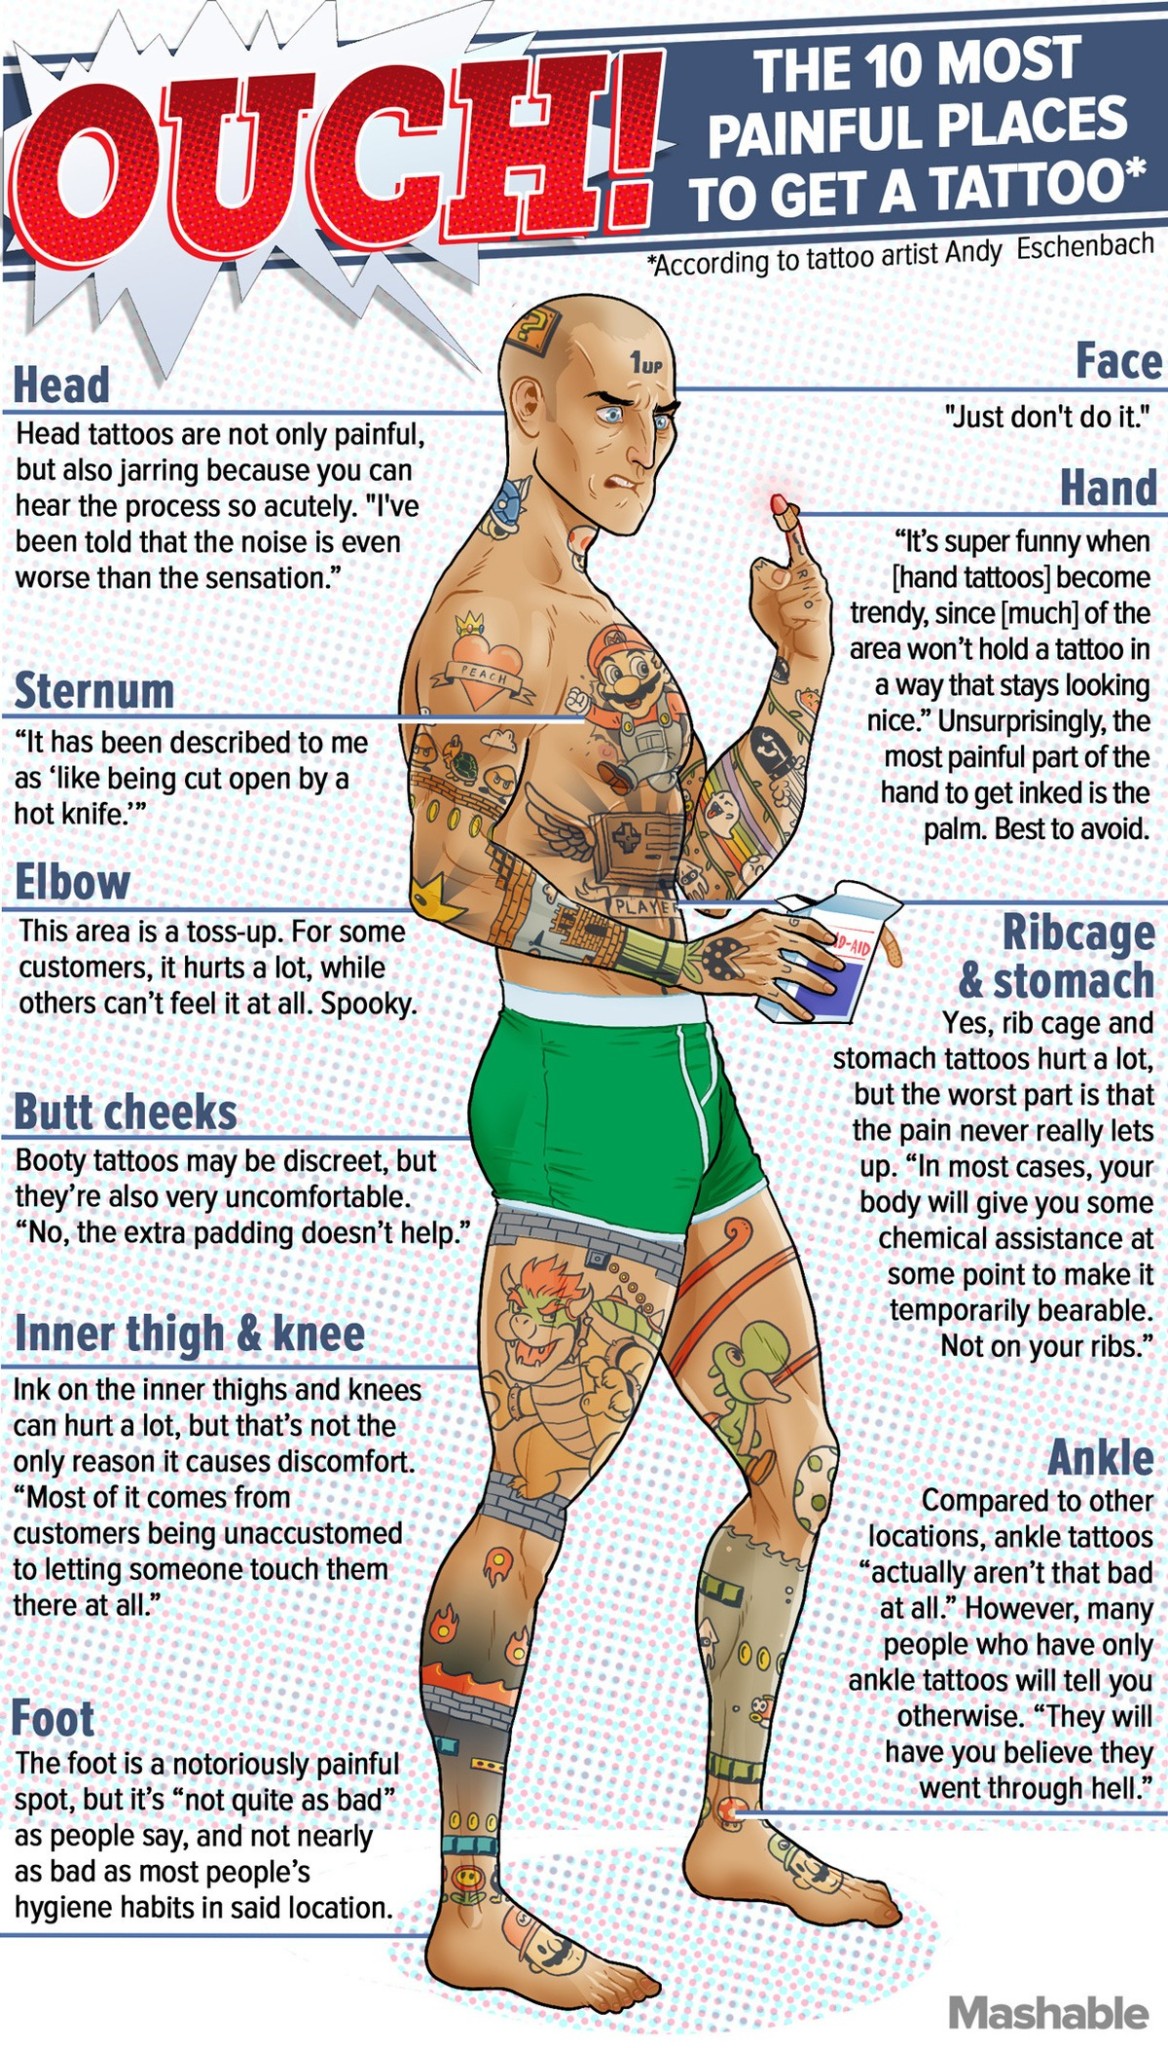 Does it Hurt?” A semiserious guide to tattooing pain levels and what to expect, probably. - Black Amethyst Tattoo Gallery